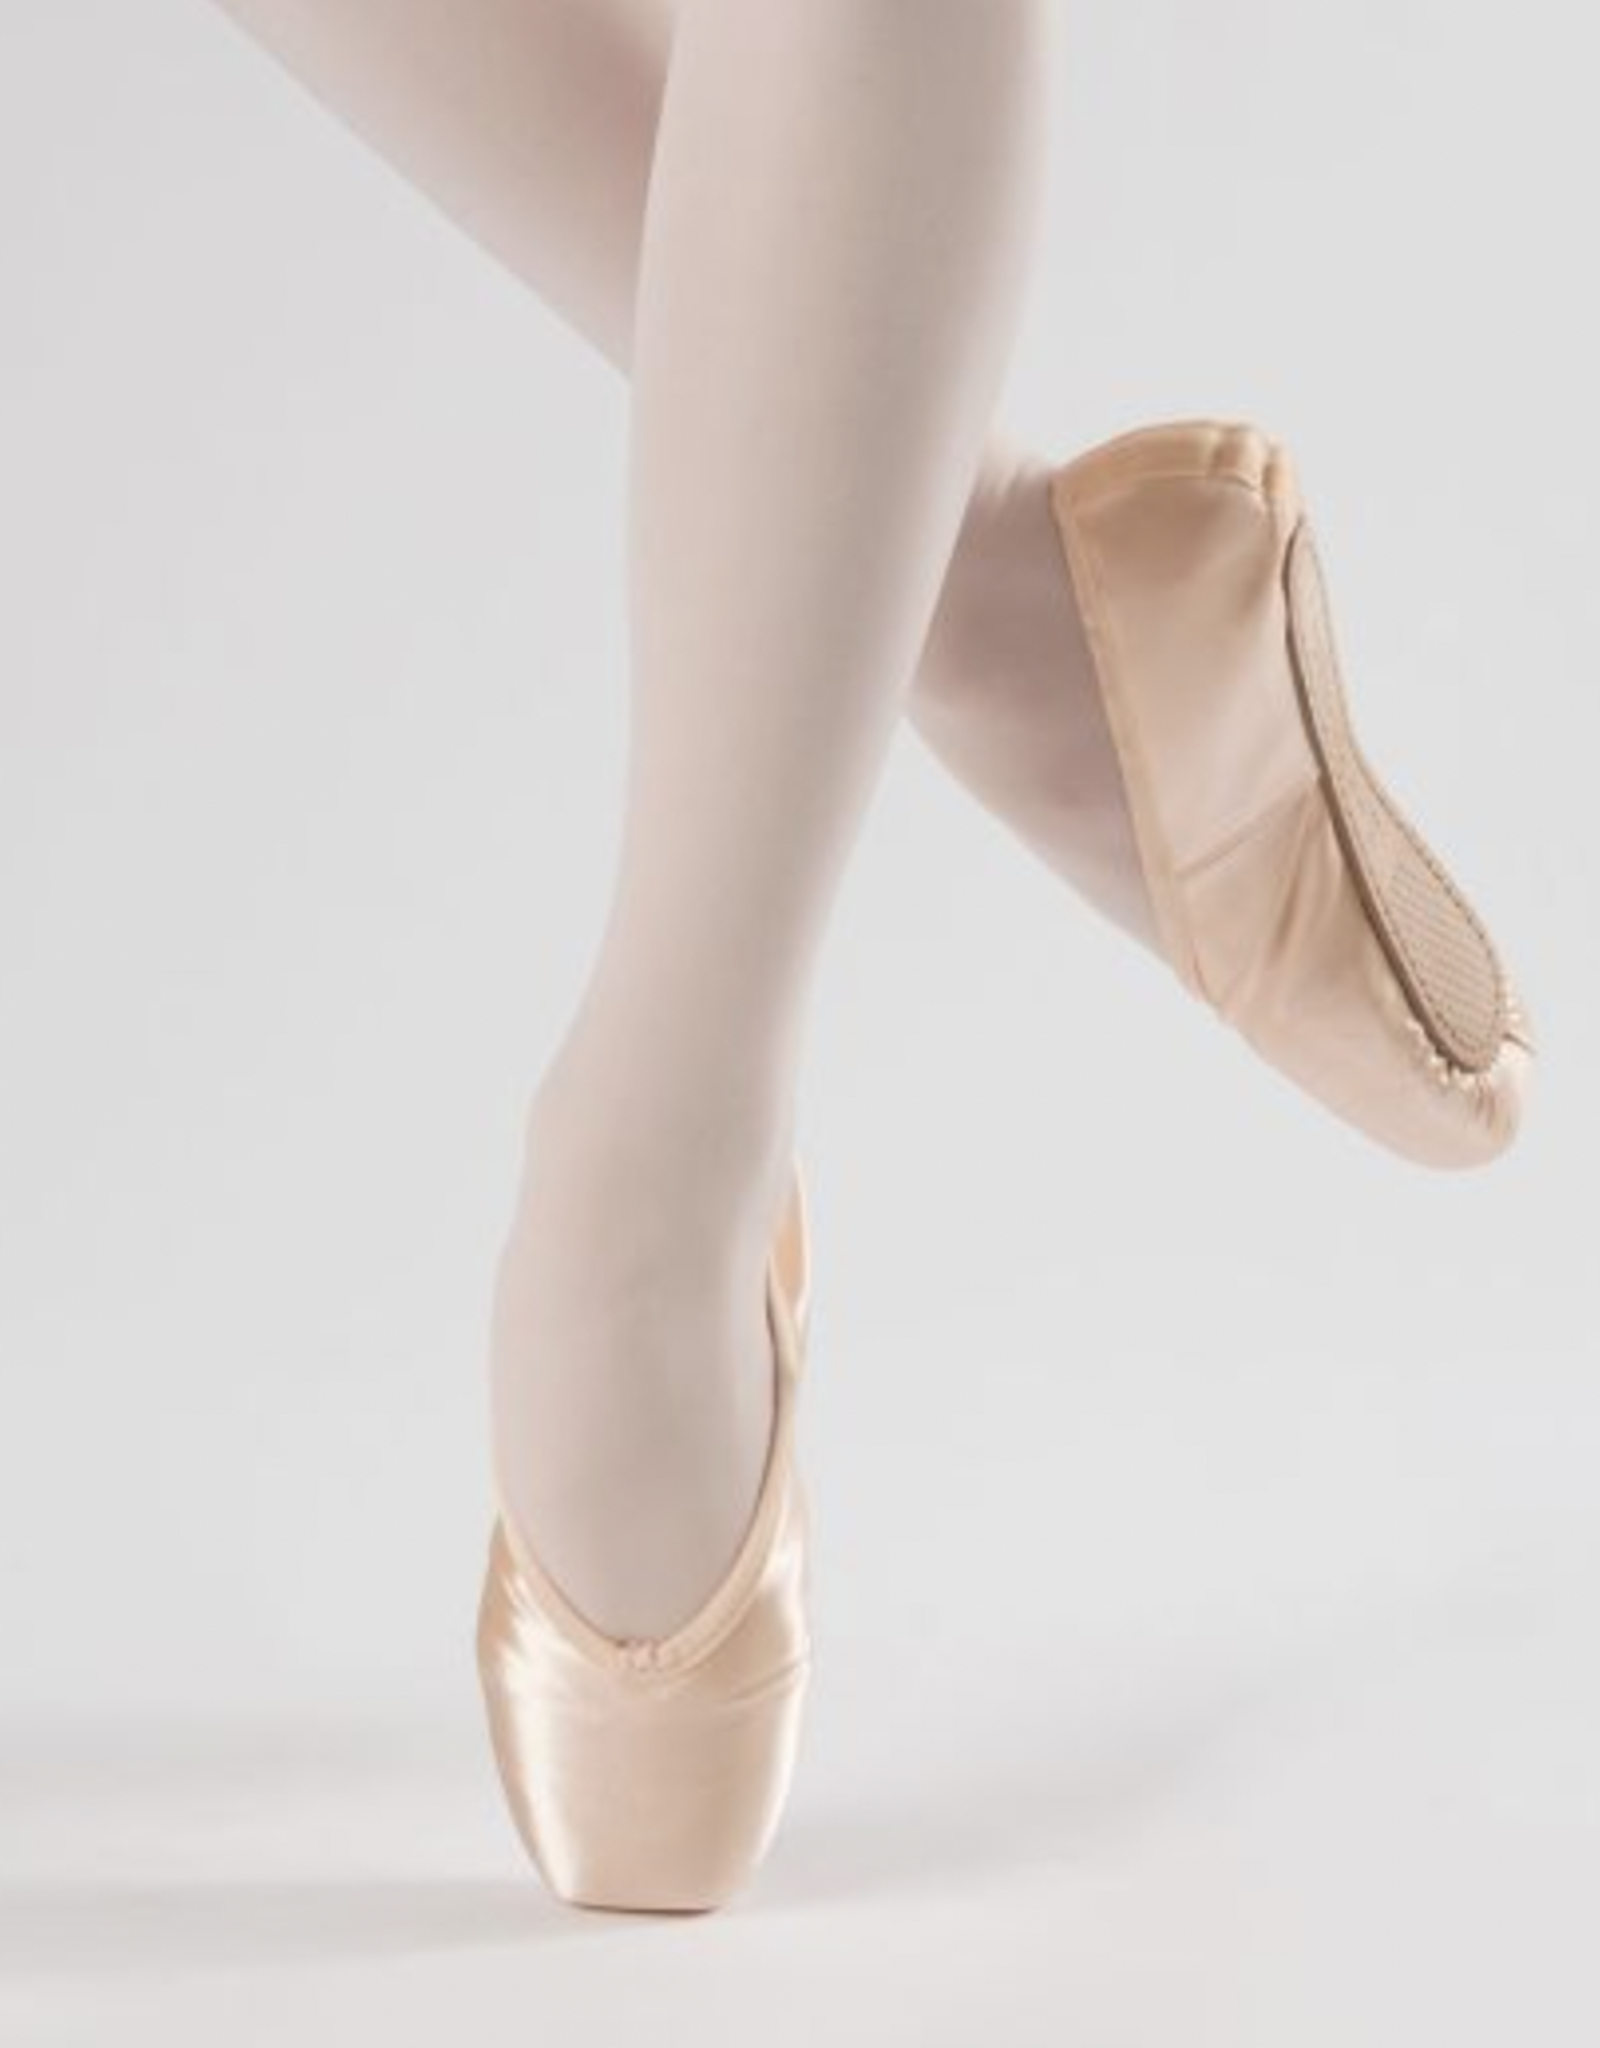 Chacott Veronese ll Pointe Shoes